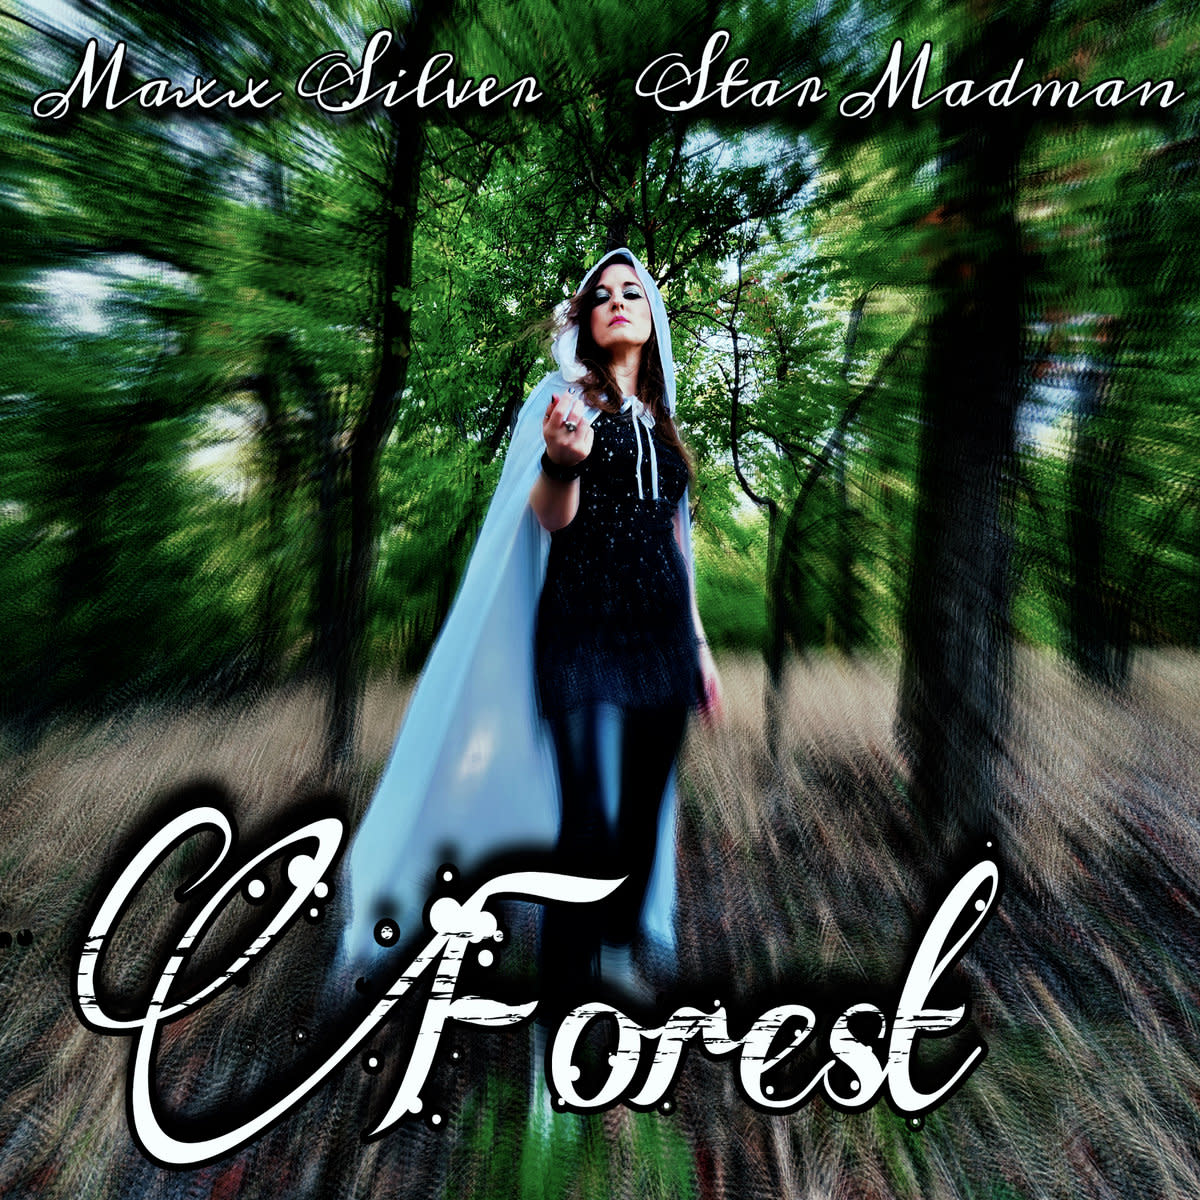 synth-single-review-forest-by-maxx-silver-star-madman